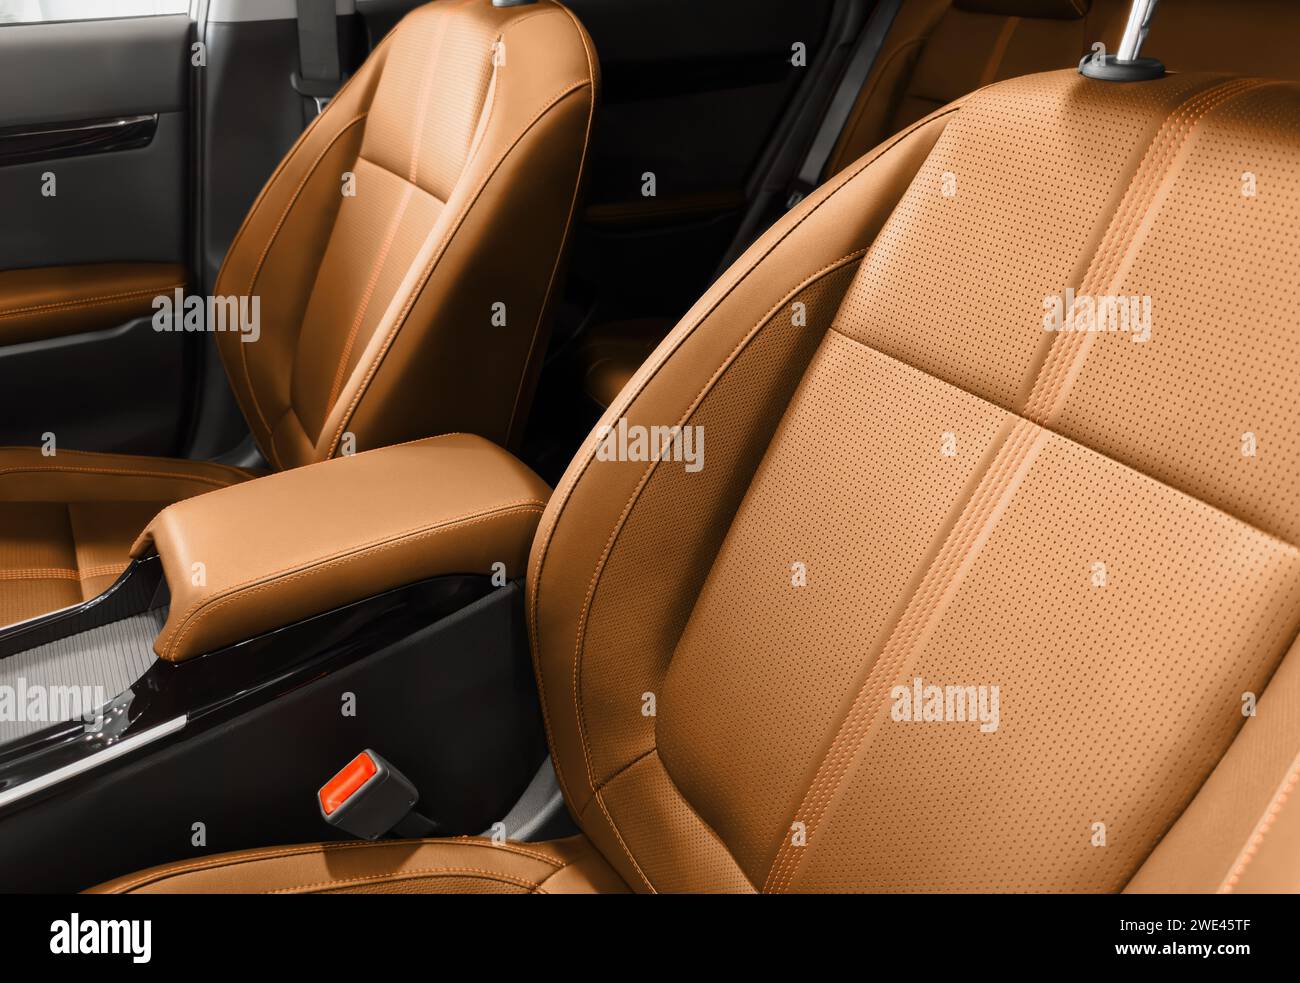 Brown luxury modern car Interior. Detail of modern car interior. Part of brown leather seats with red stitching in expensive car Stock Photo